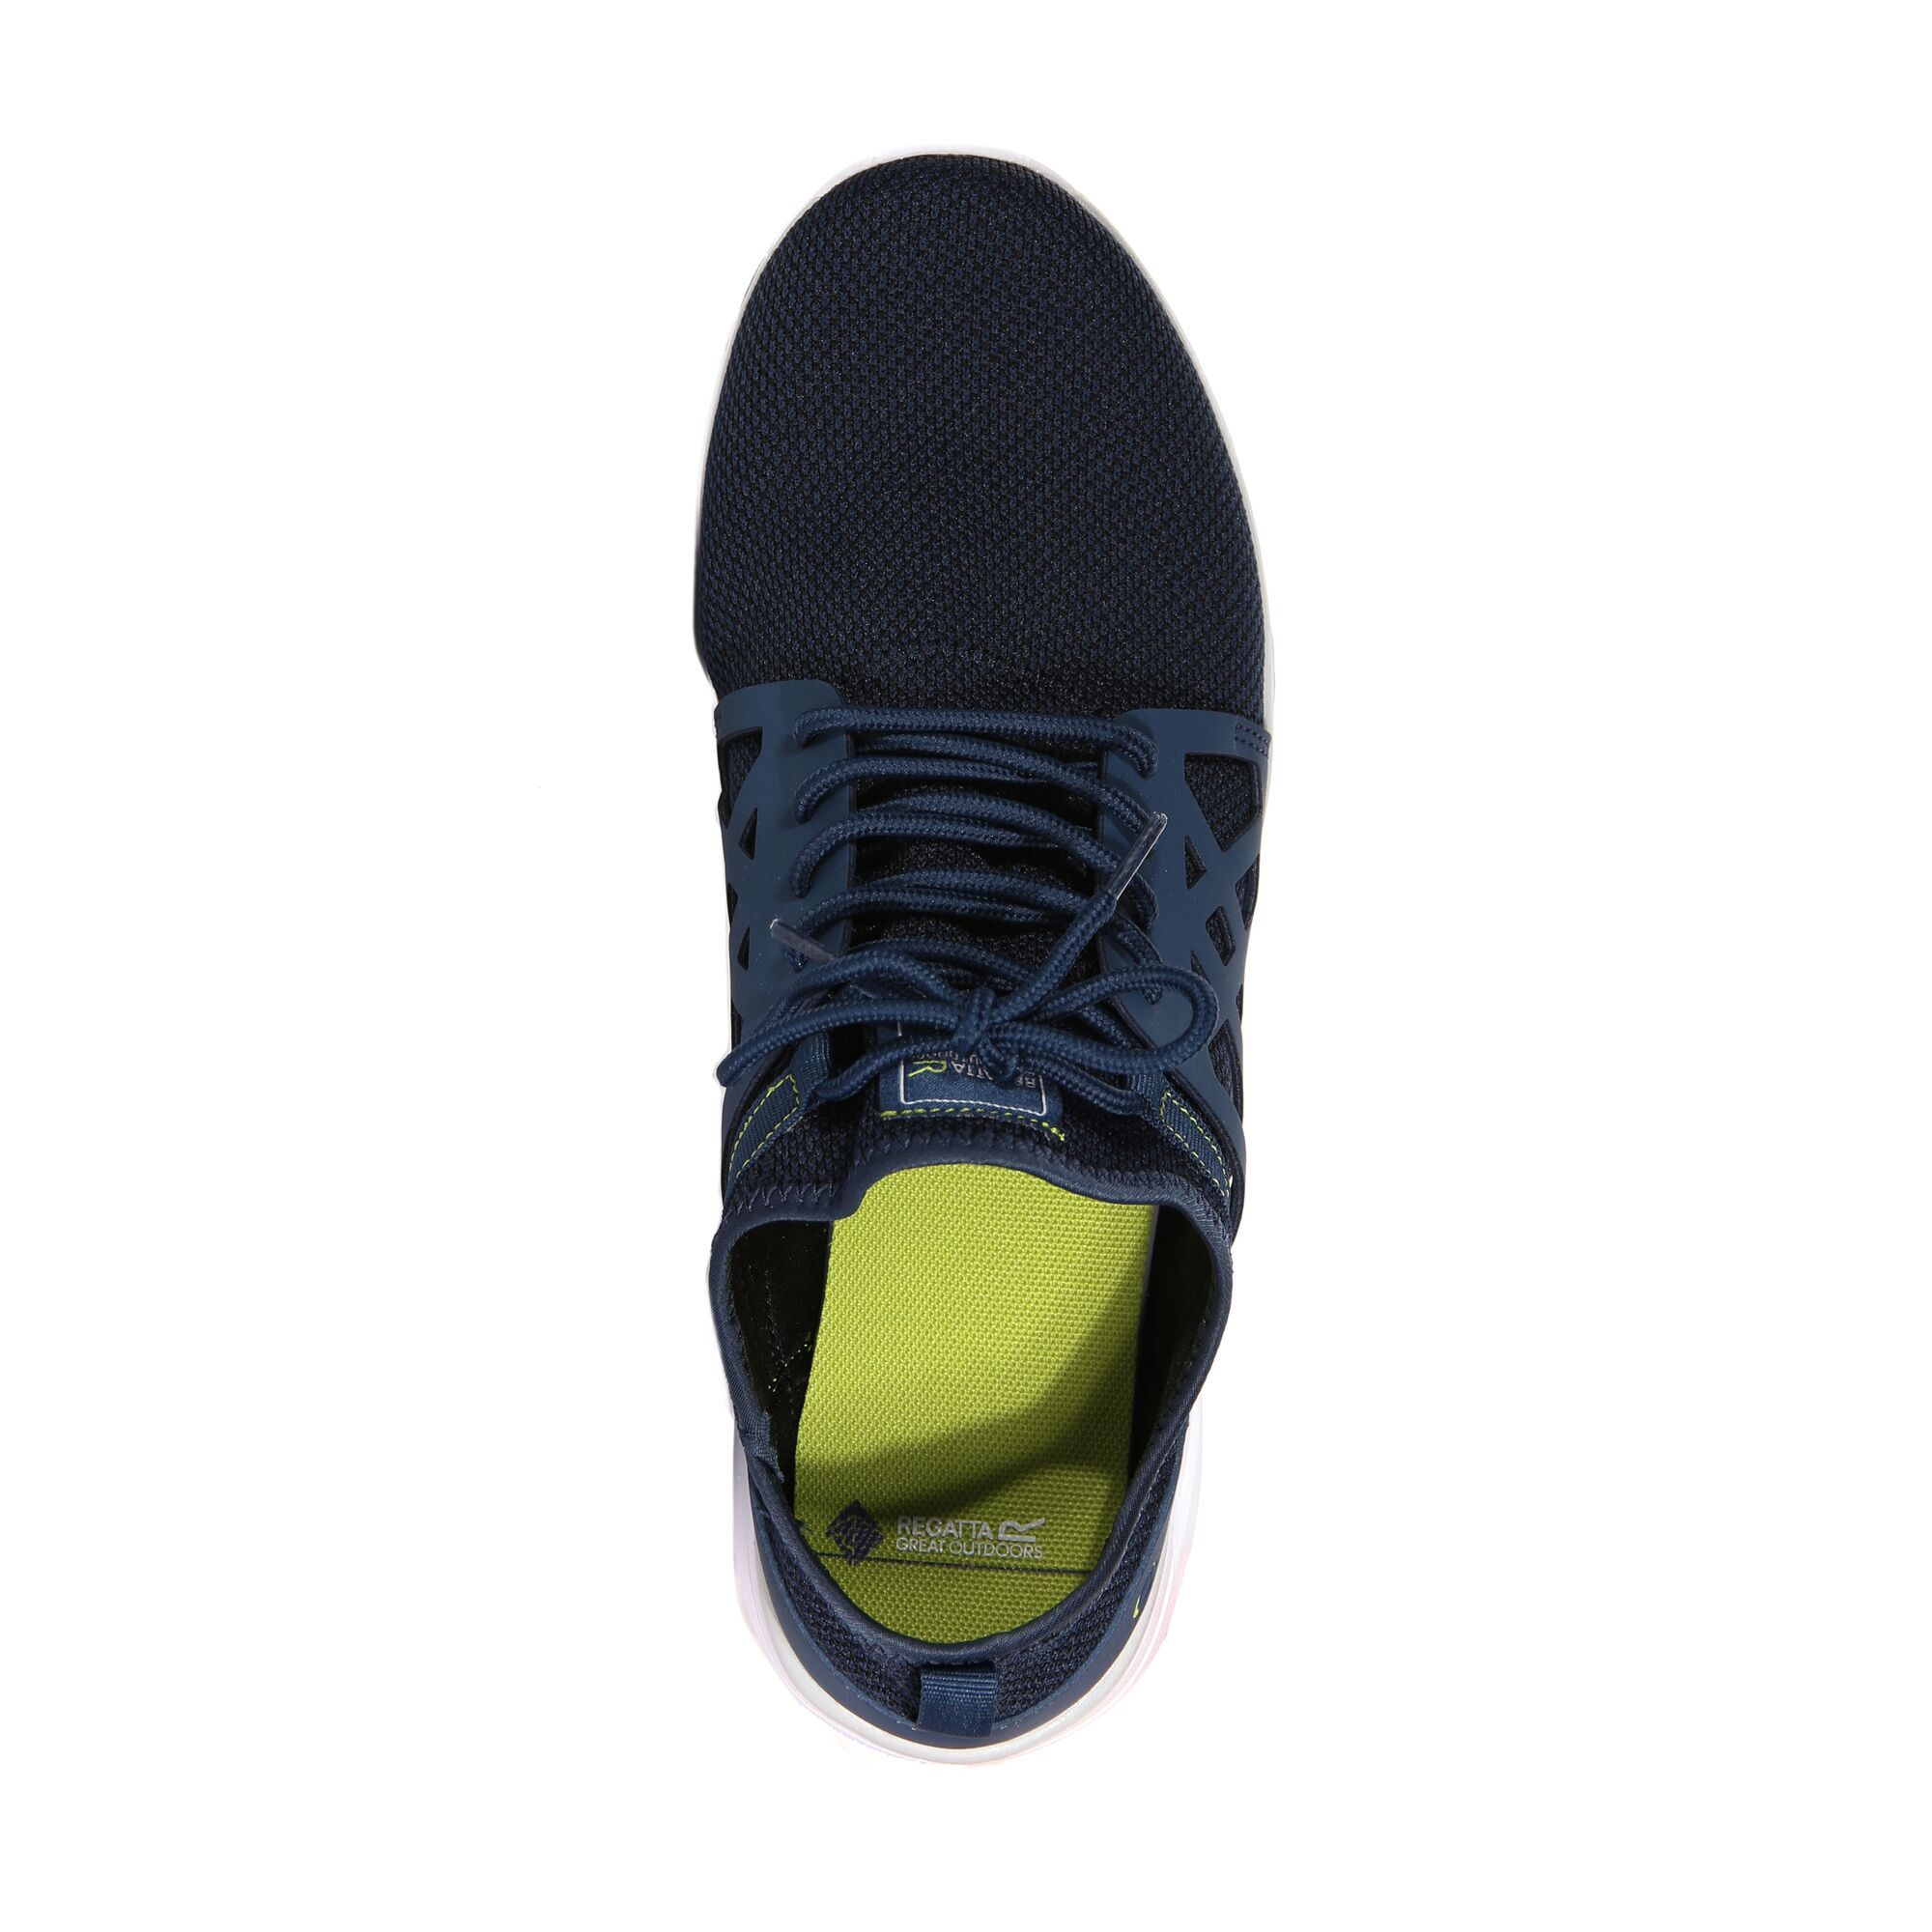 80% polyester, 20% polyurathane. Rip-stop mesh and lightweight sandwiched EVA upper. Floating lacing system for secure fit. Die cut EVA footbed for underfoot comfort and support. New XLT sole unit with strategic traction pods provides flexible lightweight comfort and improved traction. Sock fit upper for fit and comfort.